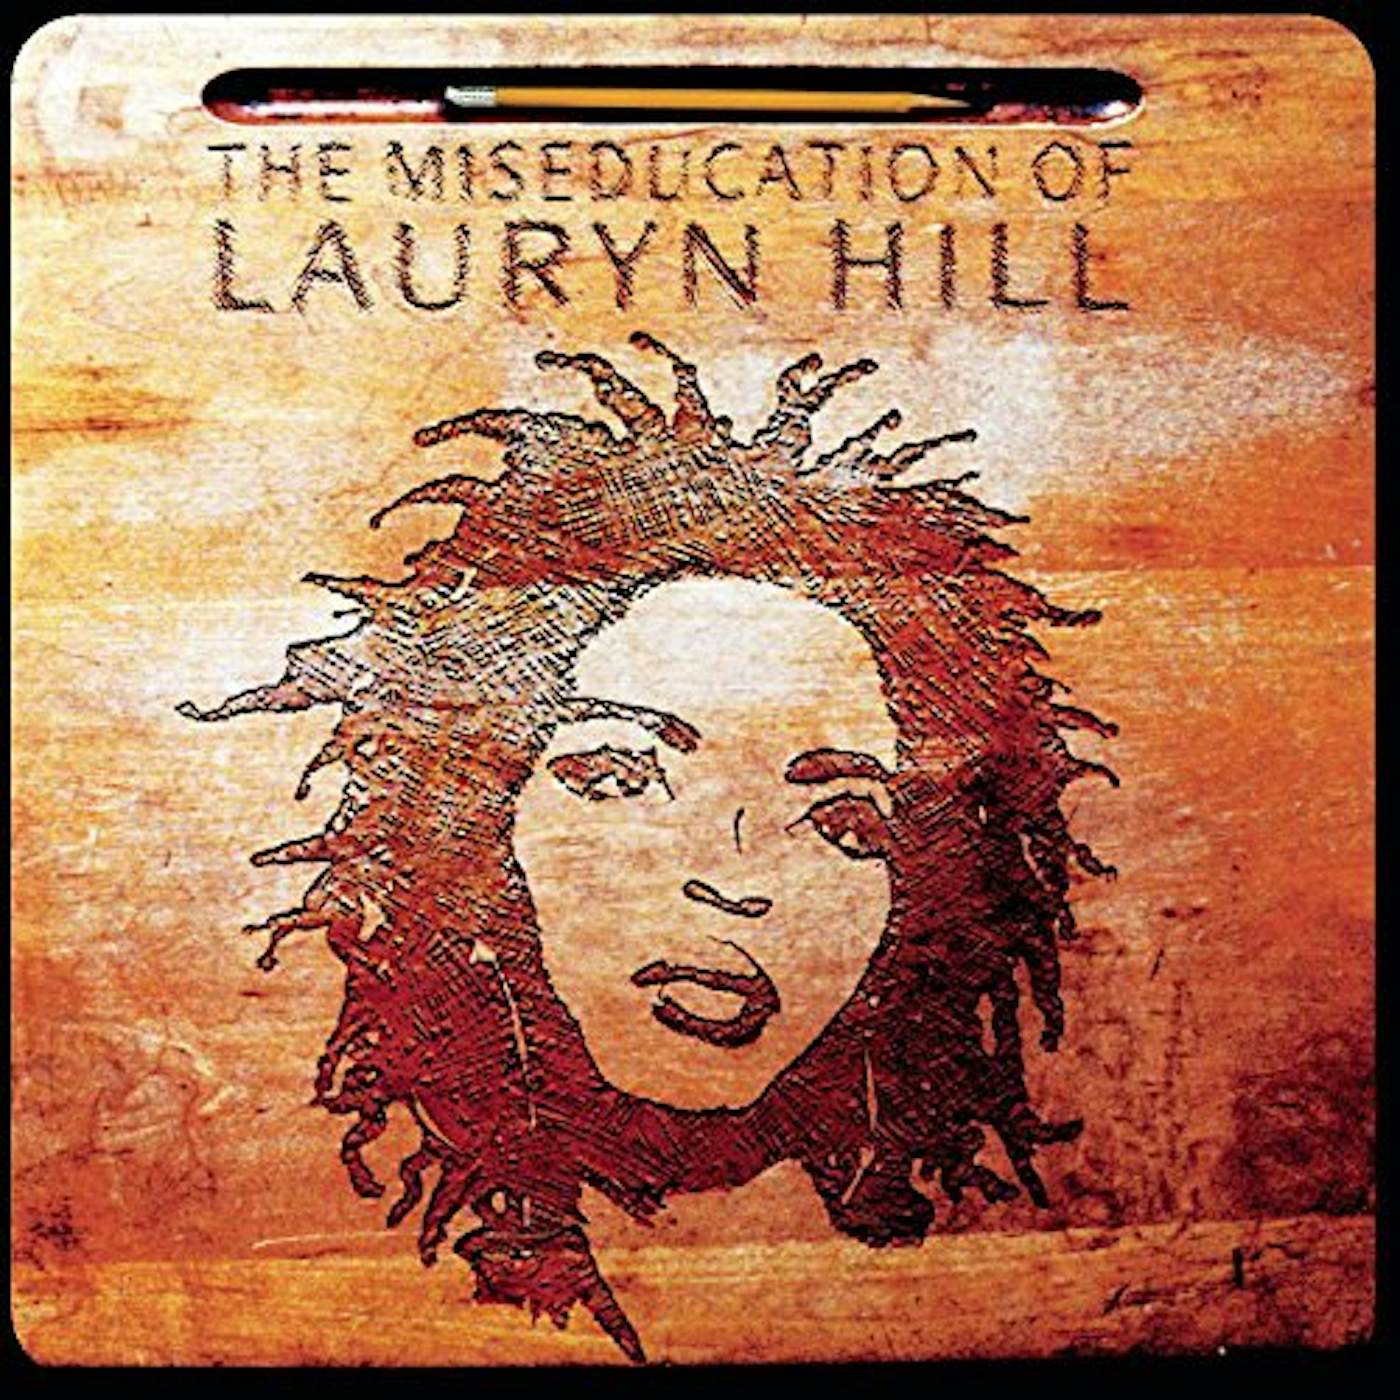 The Miseducation of Lauryn Hill - Double LP Vinyl Record